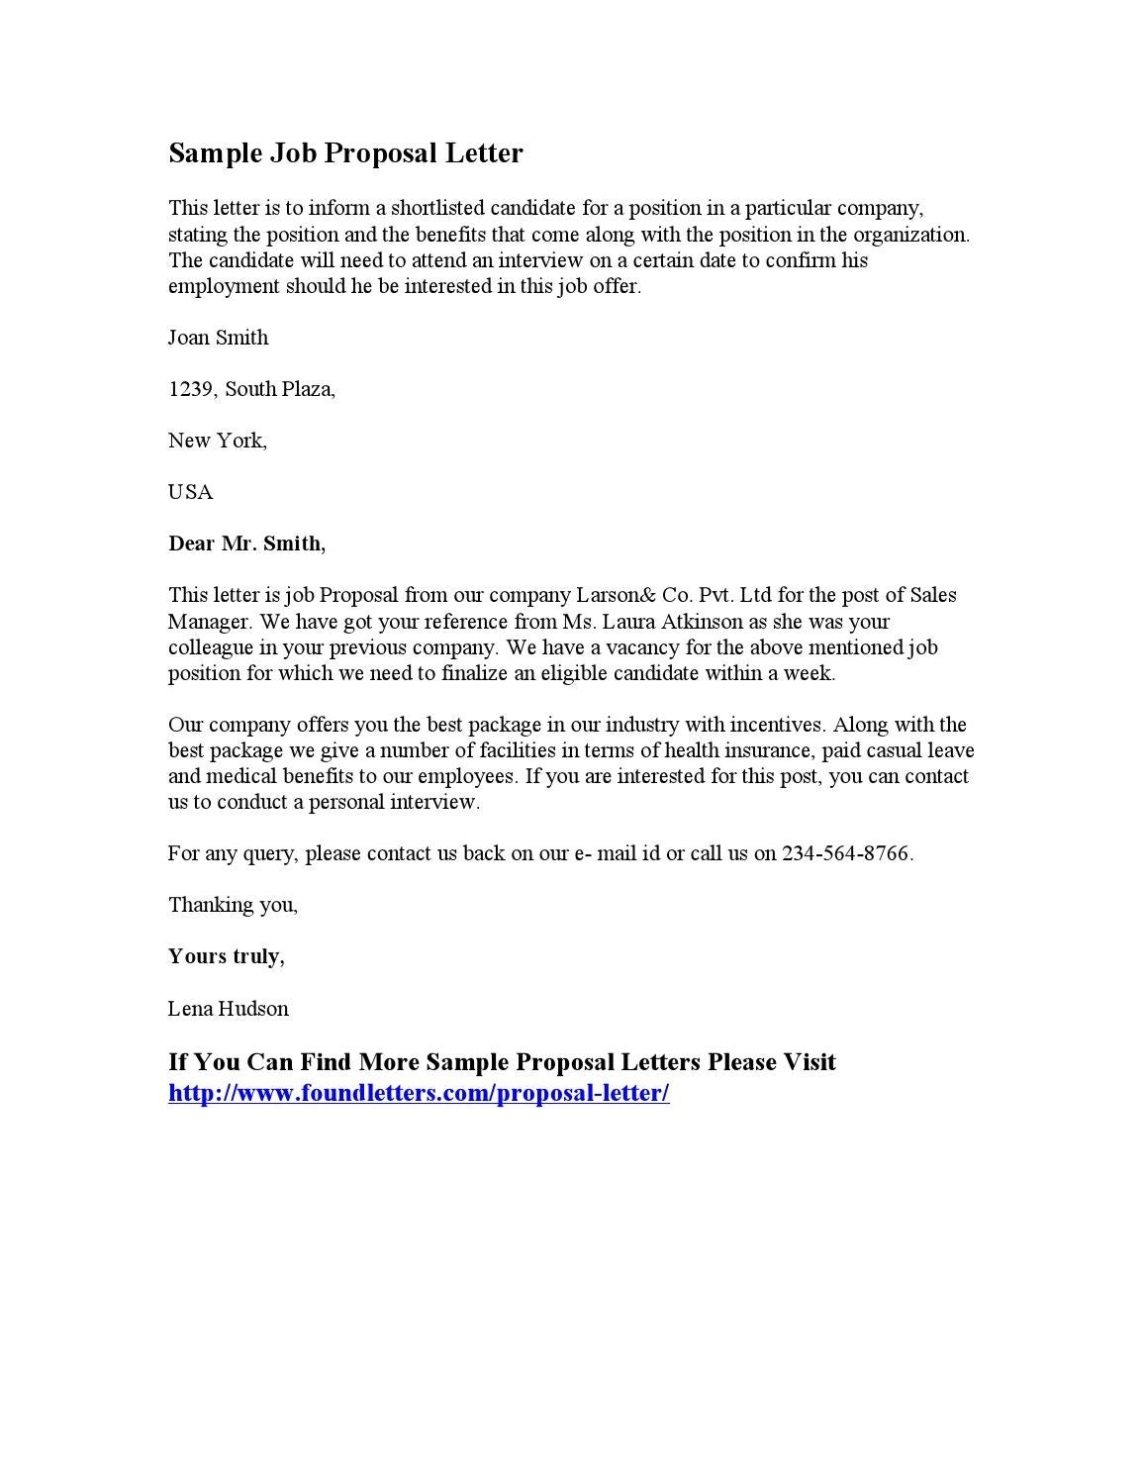 Sample Job Proposal Letter By Found Letters – Issuu Regarding New Position Proposal Template